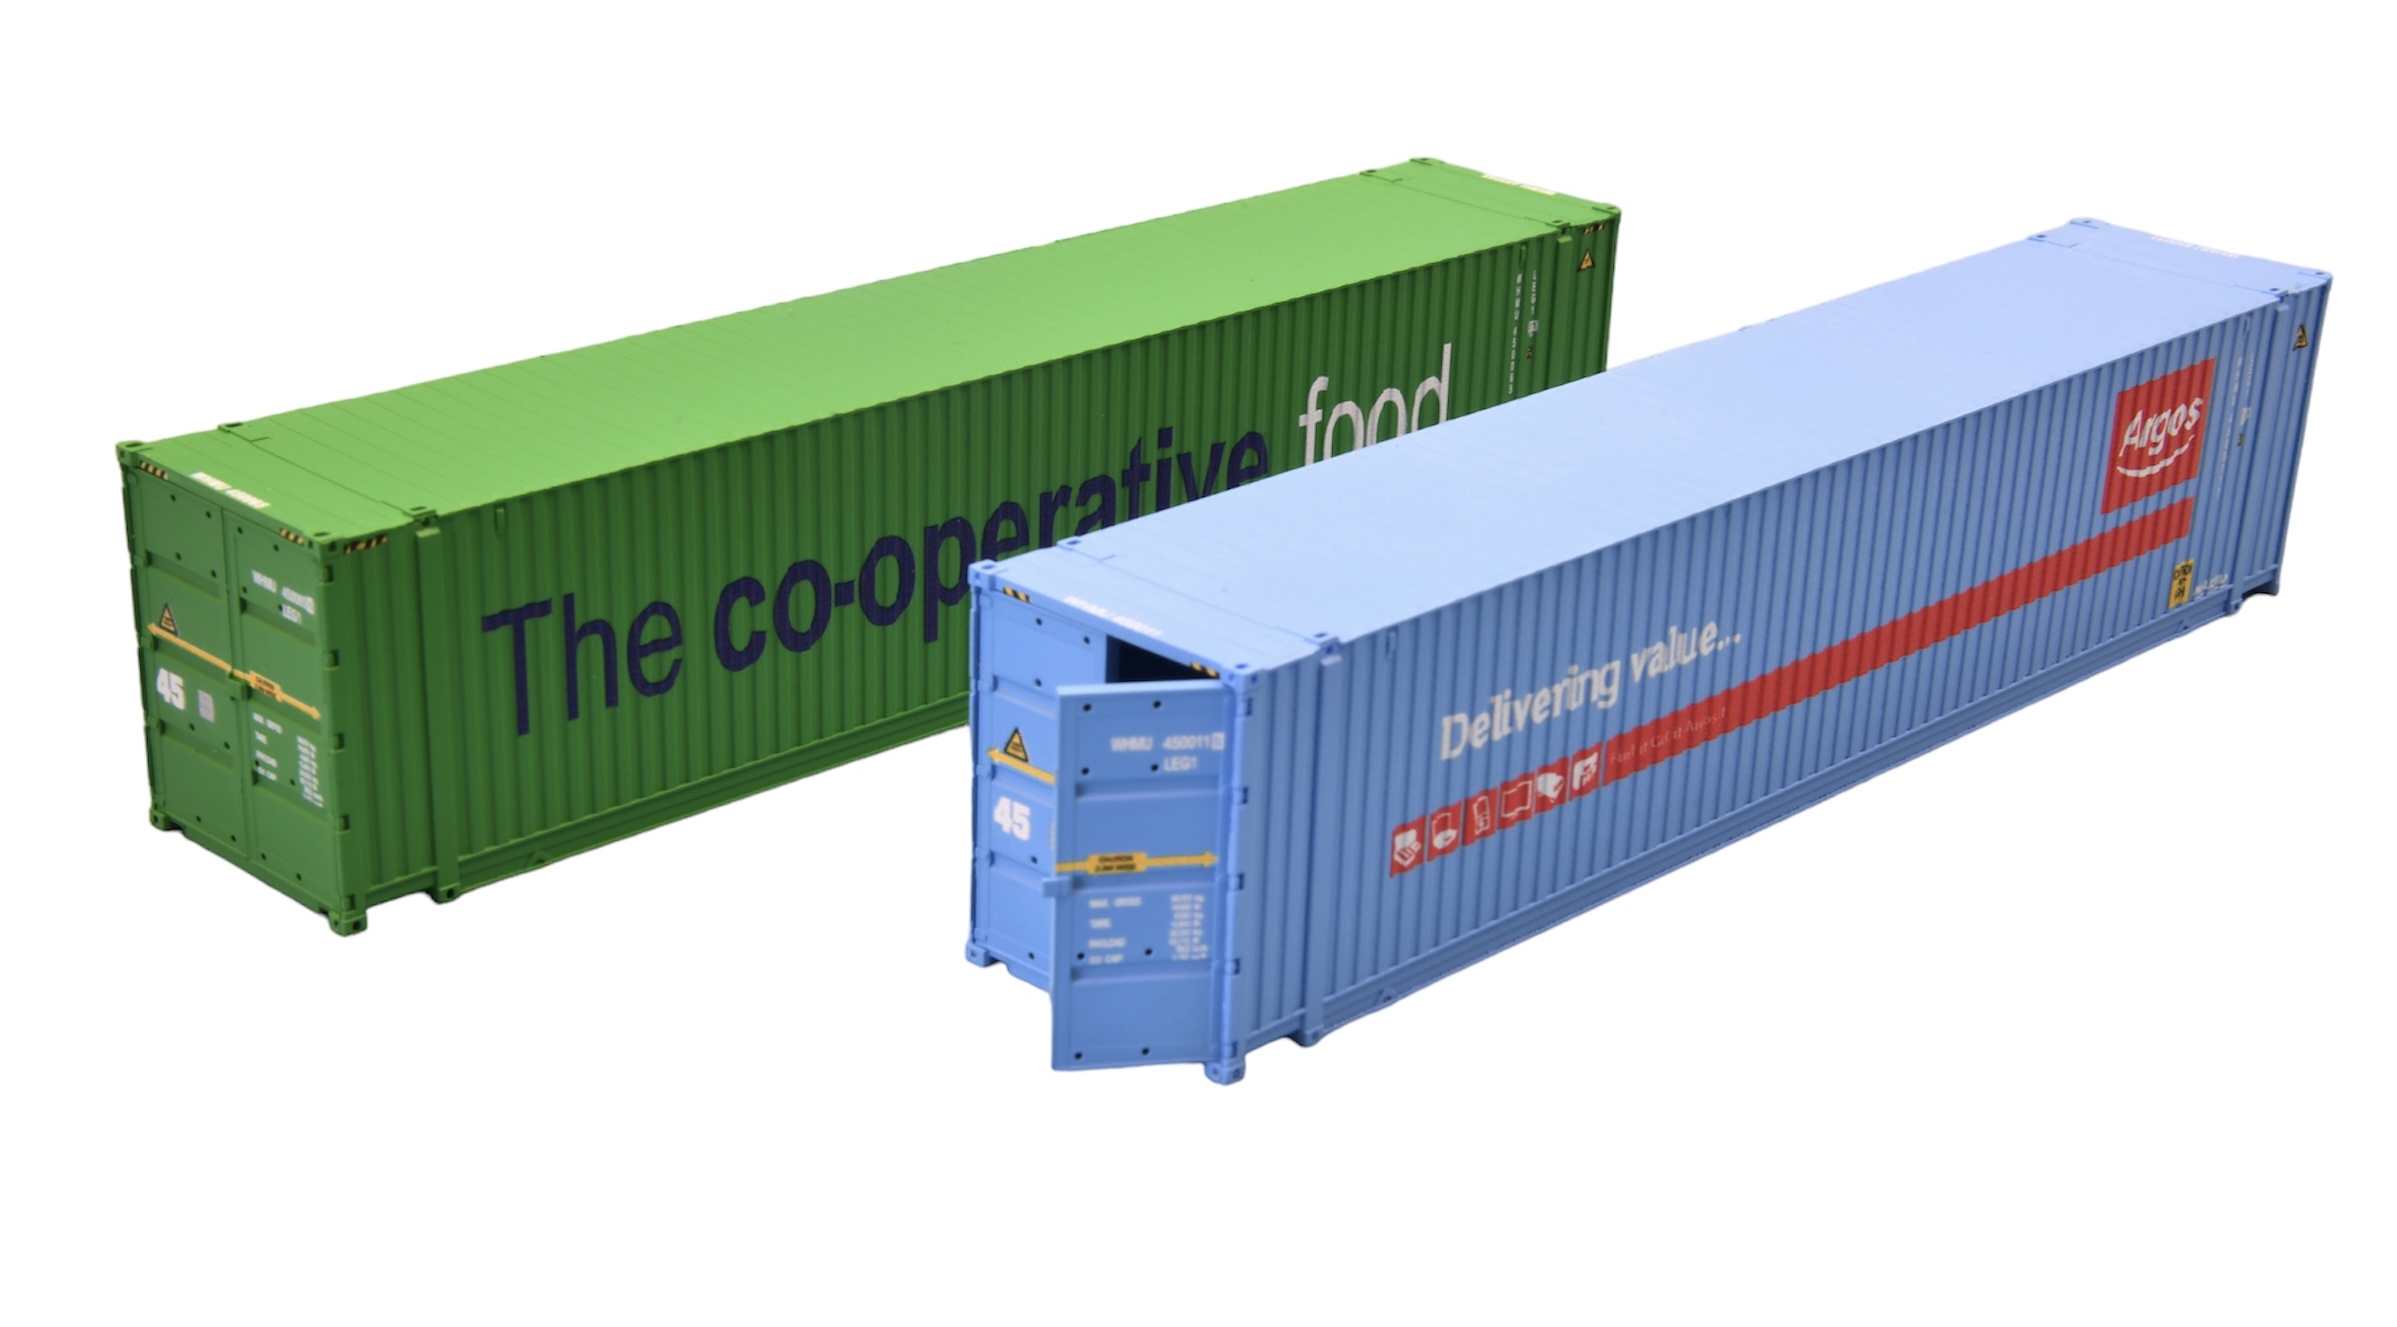 4F-028-001 Dapol 45 Foot Container Hi Cube Twin Pack Argos / Co-operative